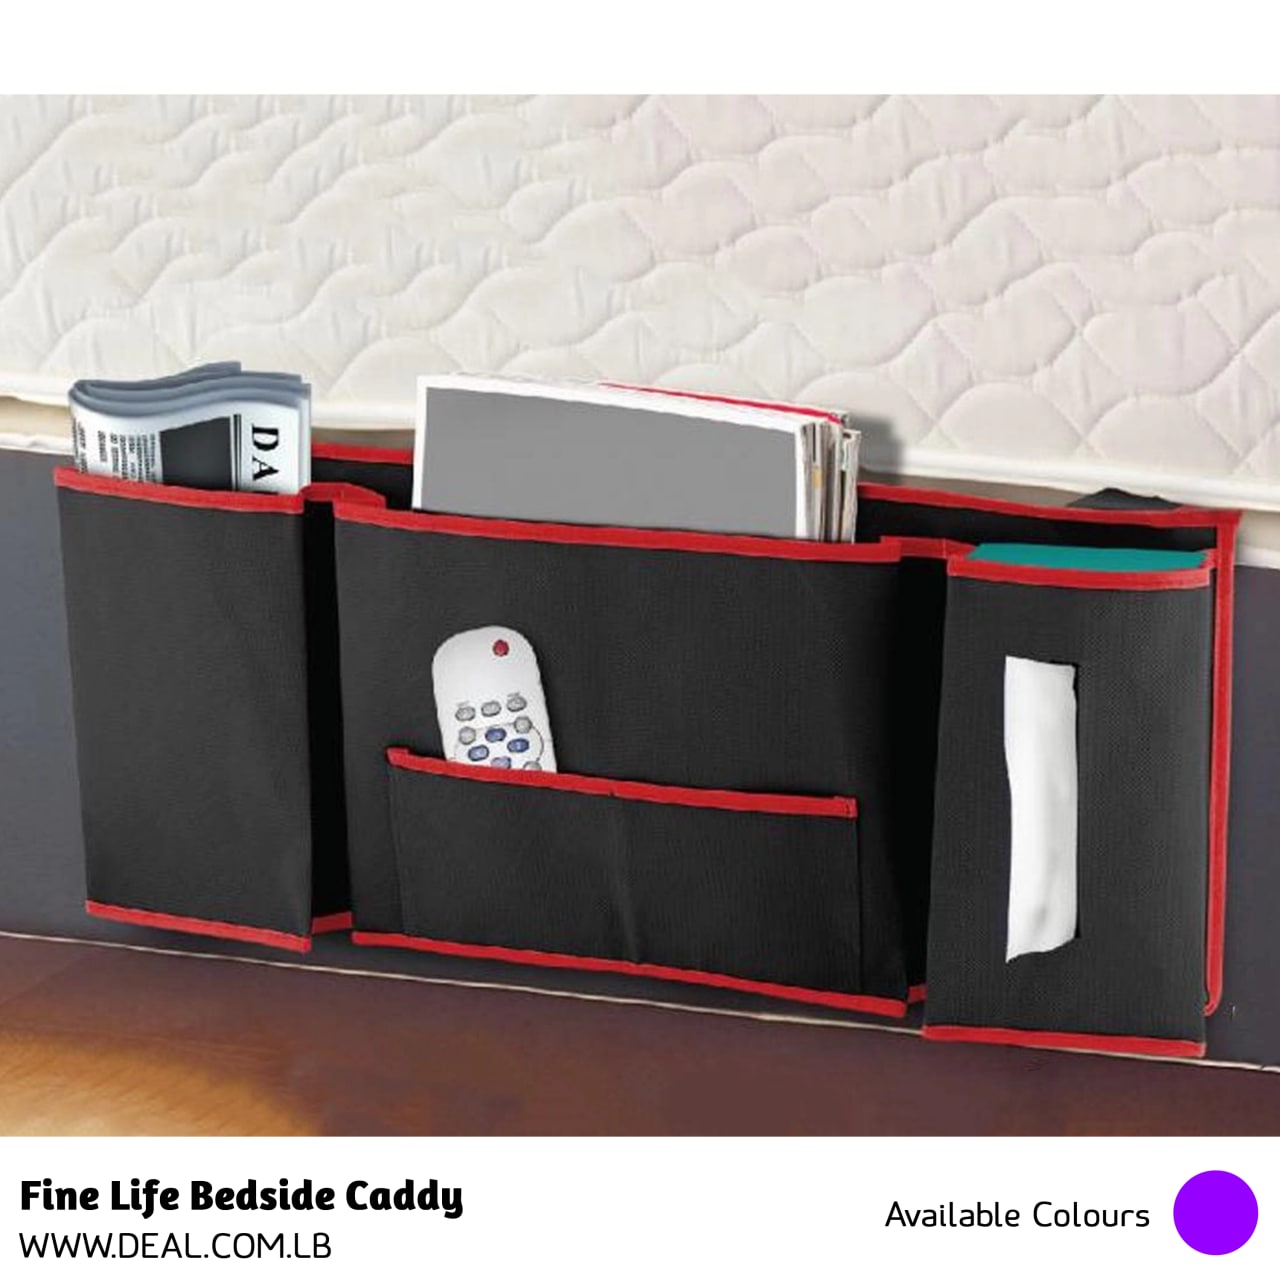 Fine Life Bedside Caddy